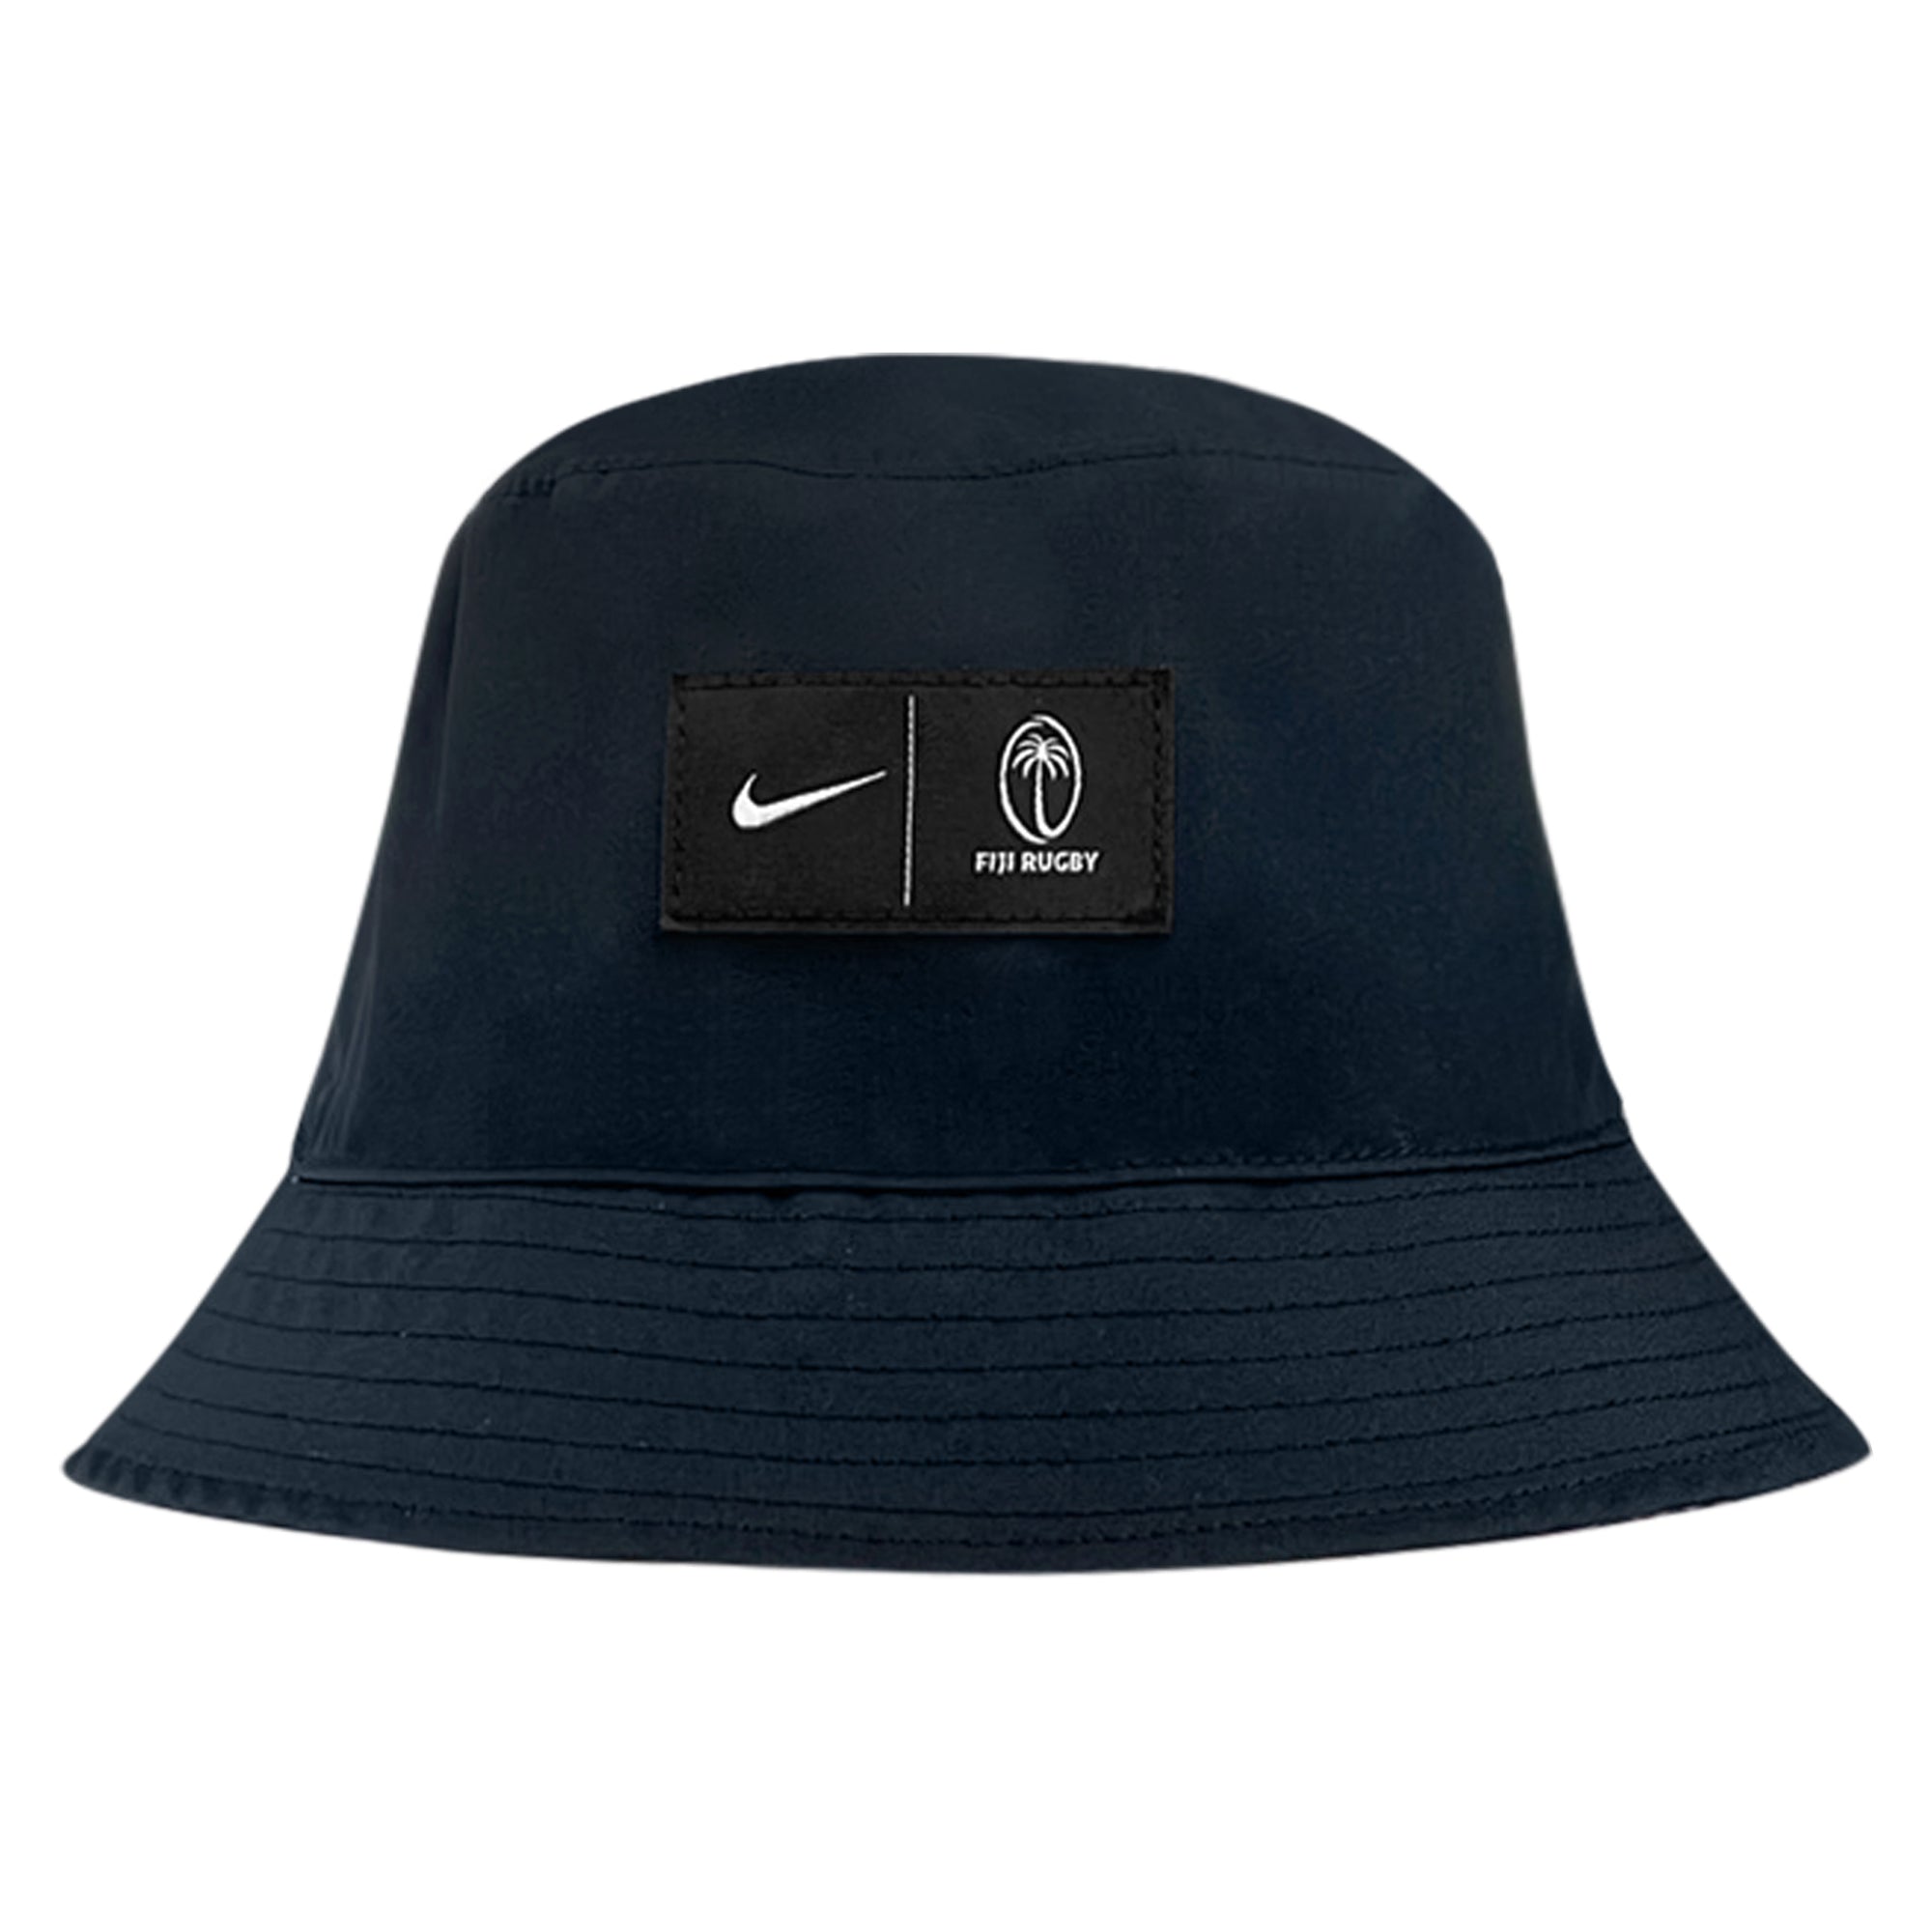 Fiji Rugby Bucket Hat by Nike 23/24 - Black & Red - World Rugby Shop